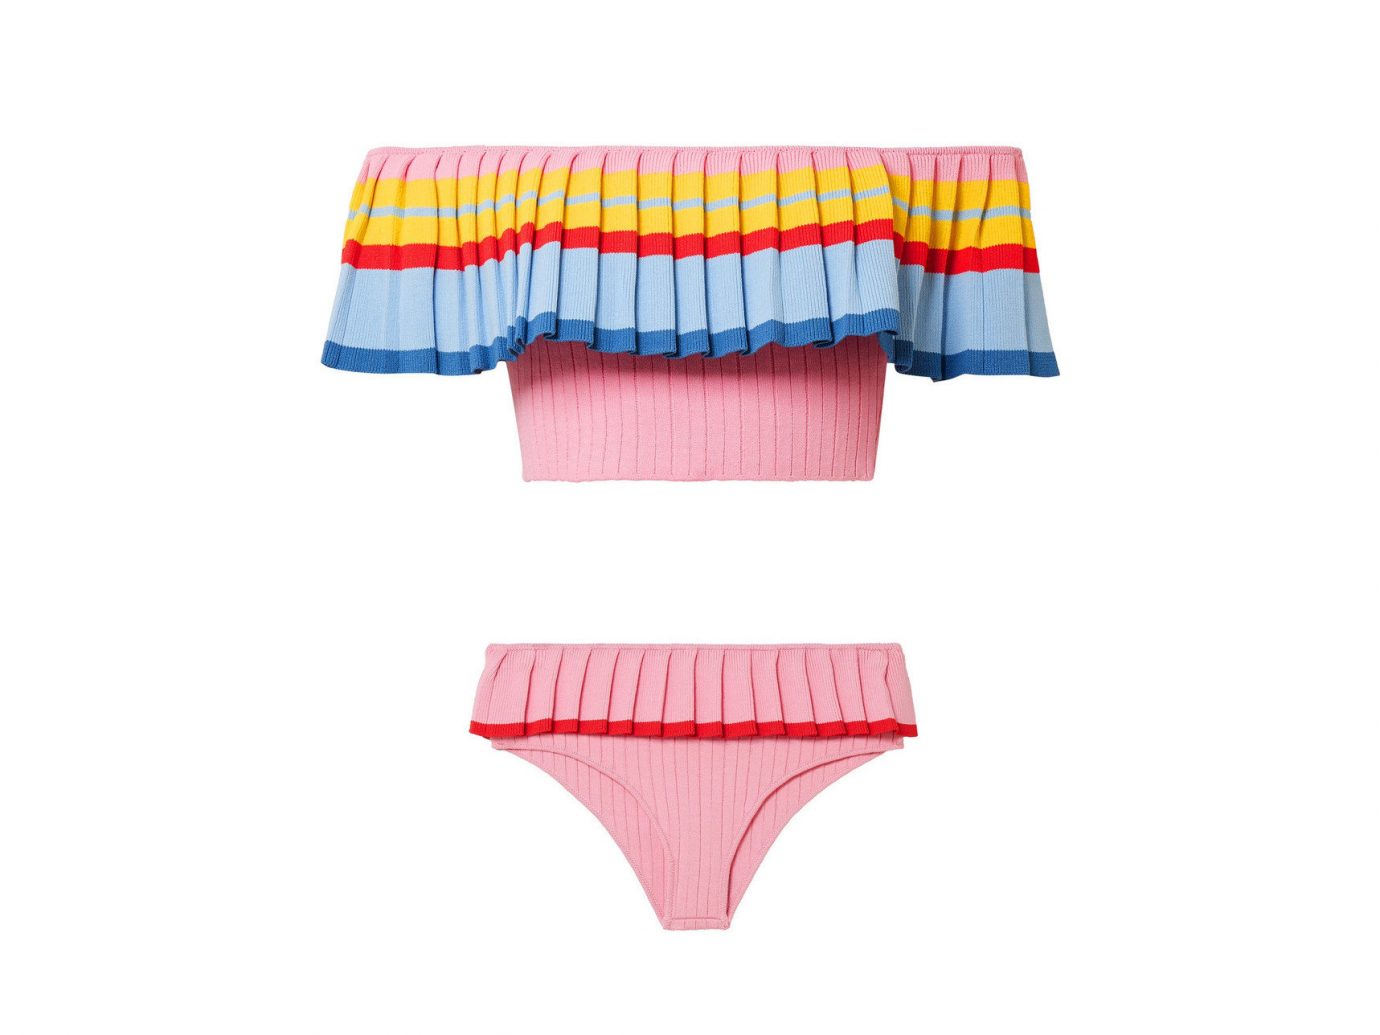 Style + Design Travel Shop pink briefs undergarment swimsuit bottom underpants product angle